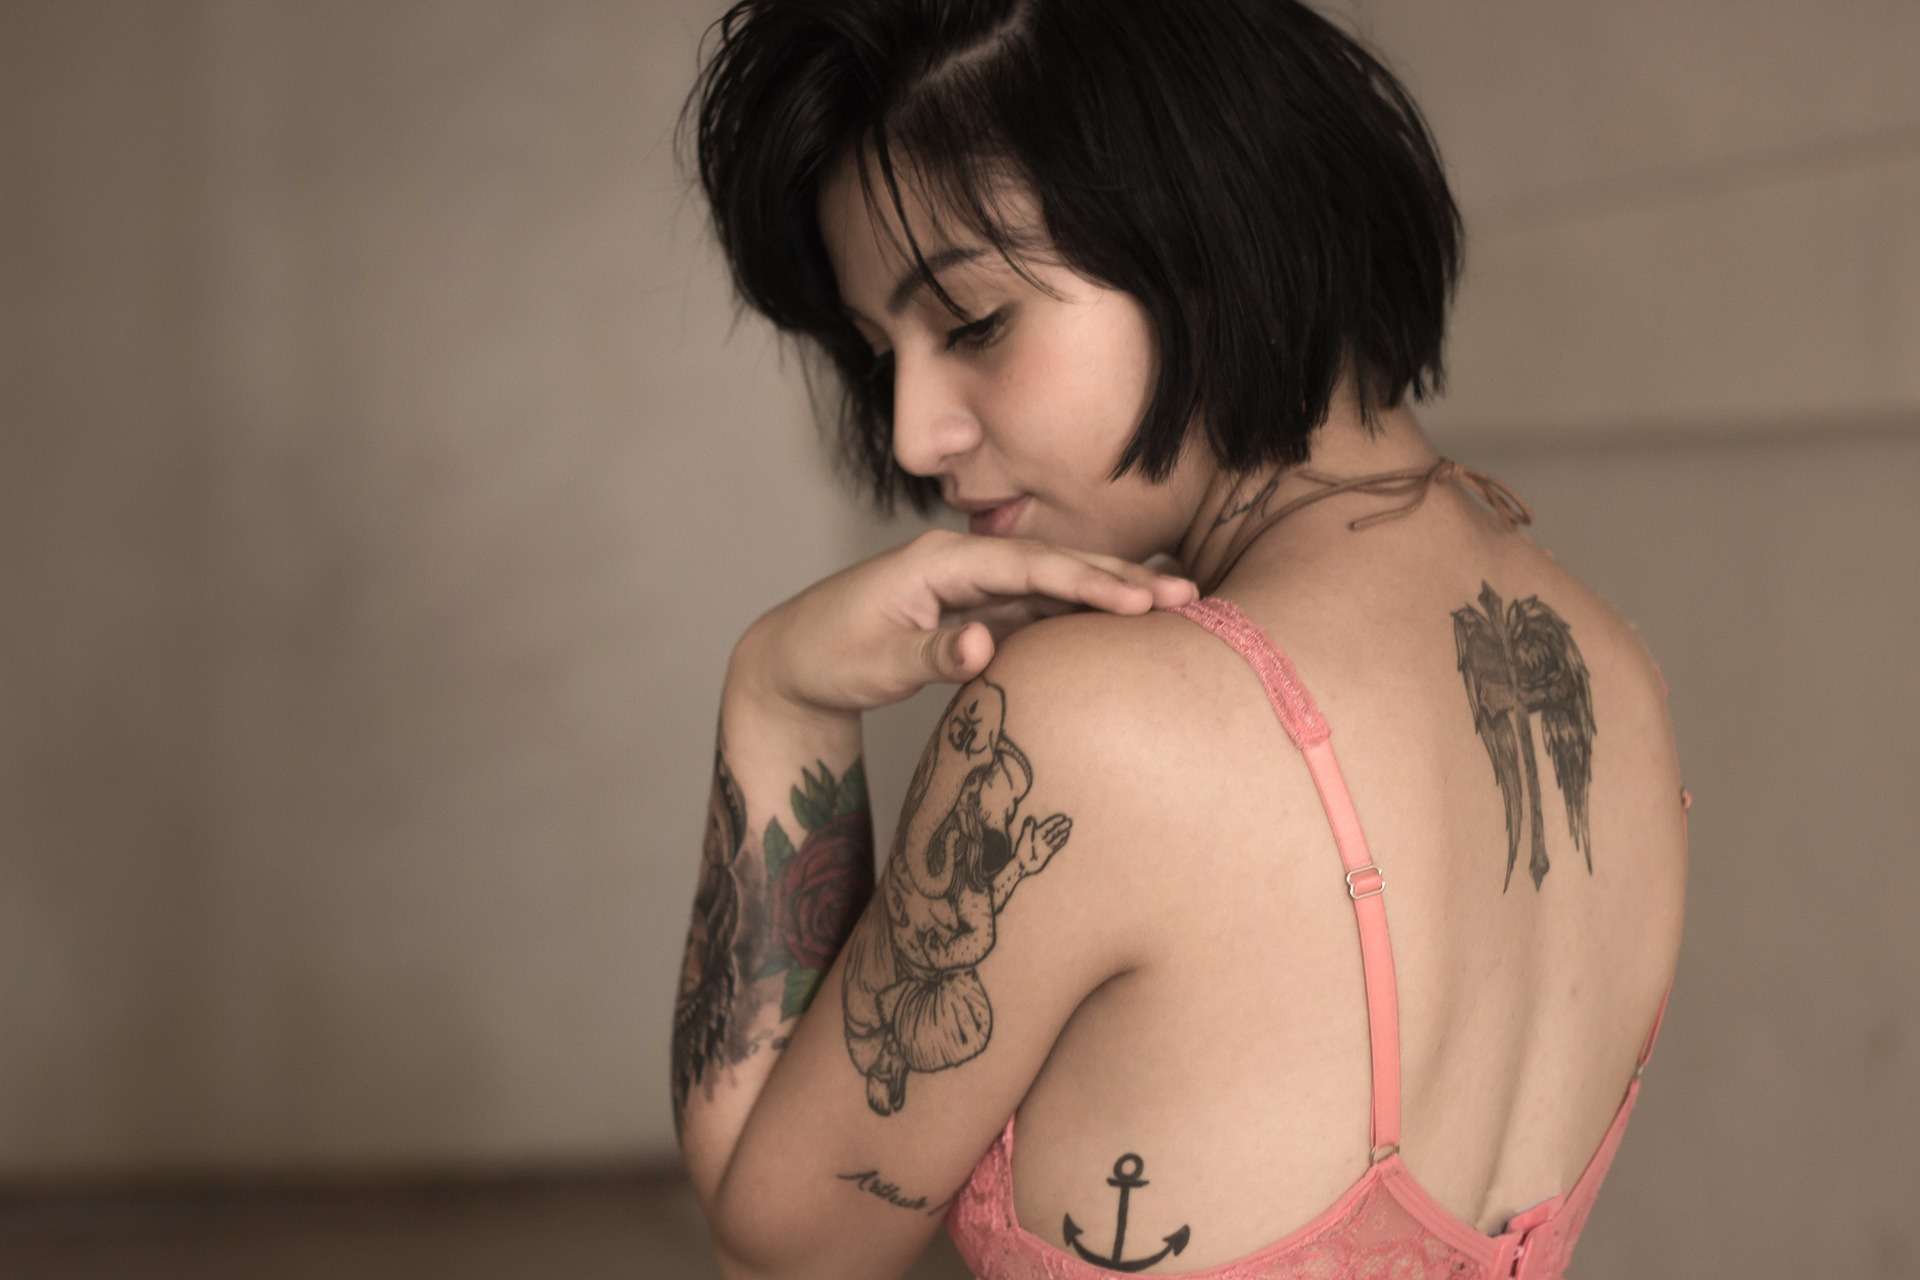 Tattoos Are Spreading All Over The World Regardless Of Gender